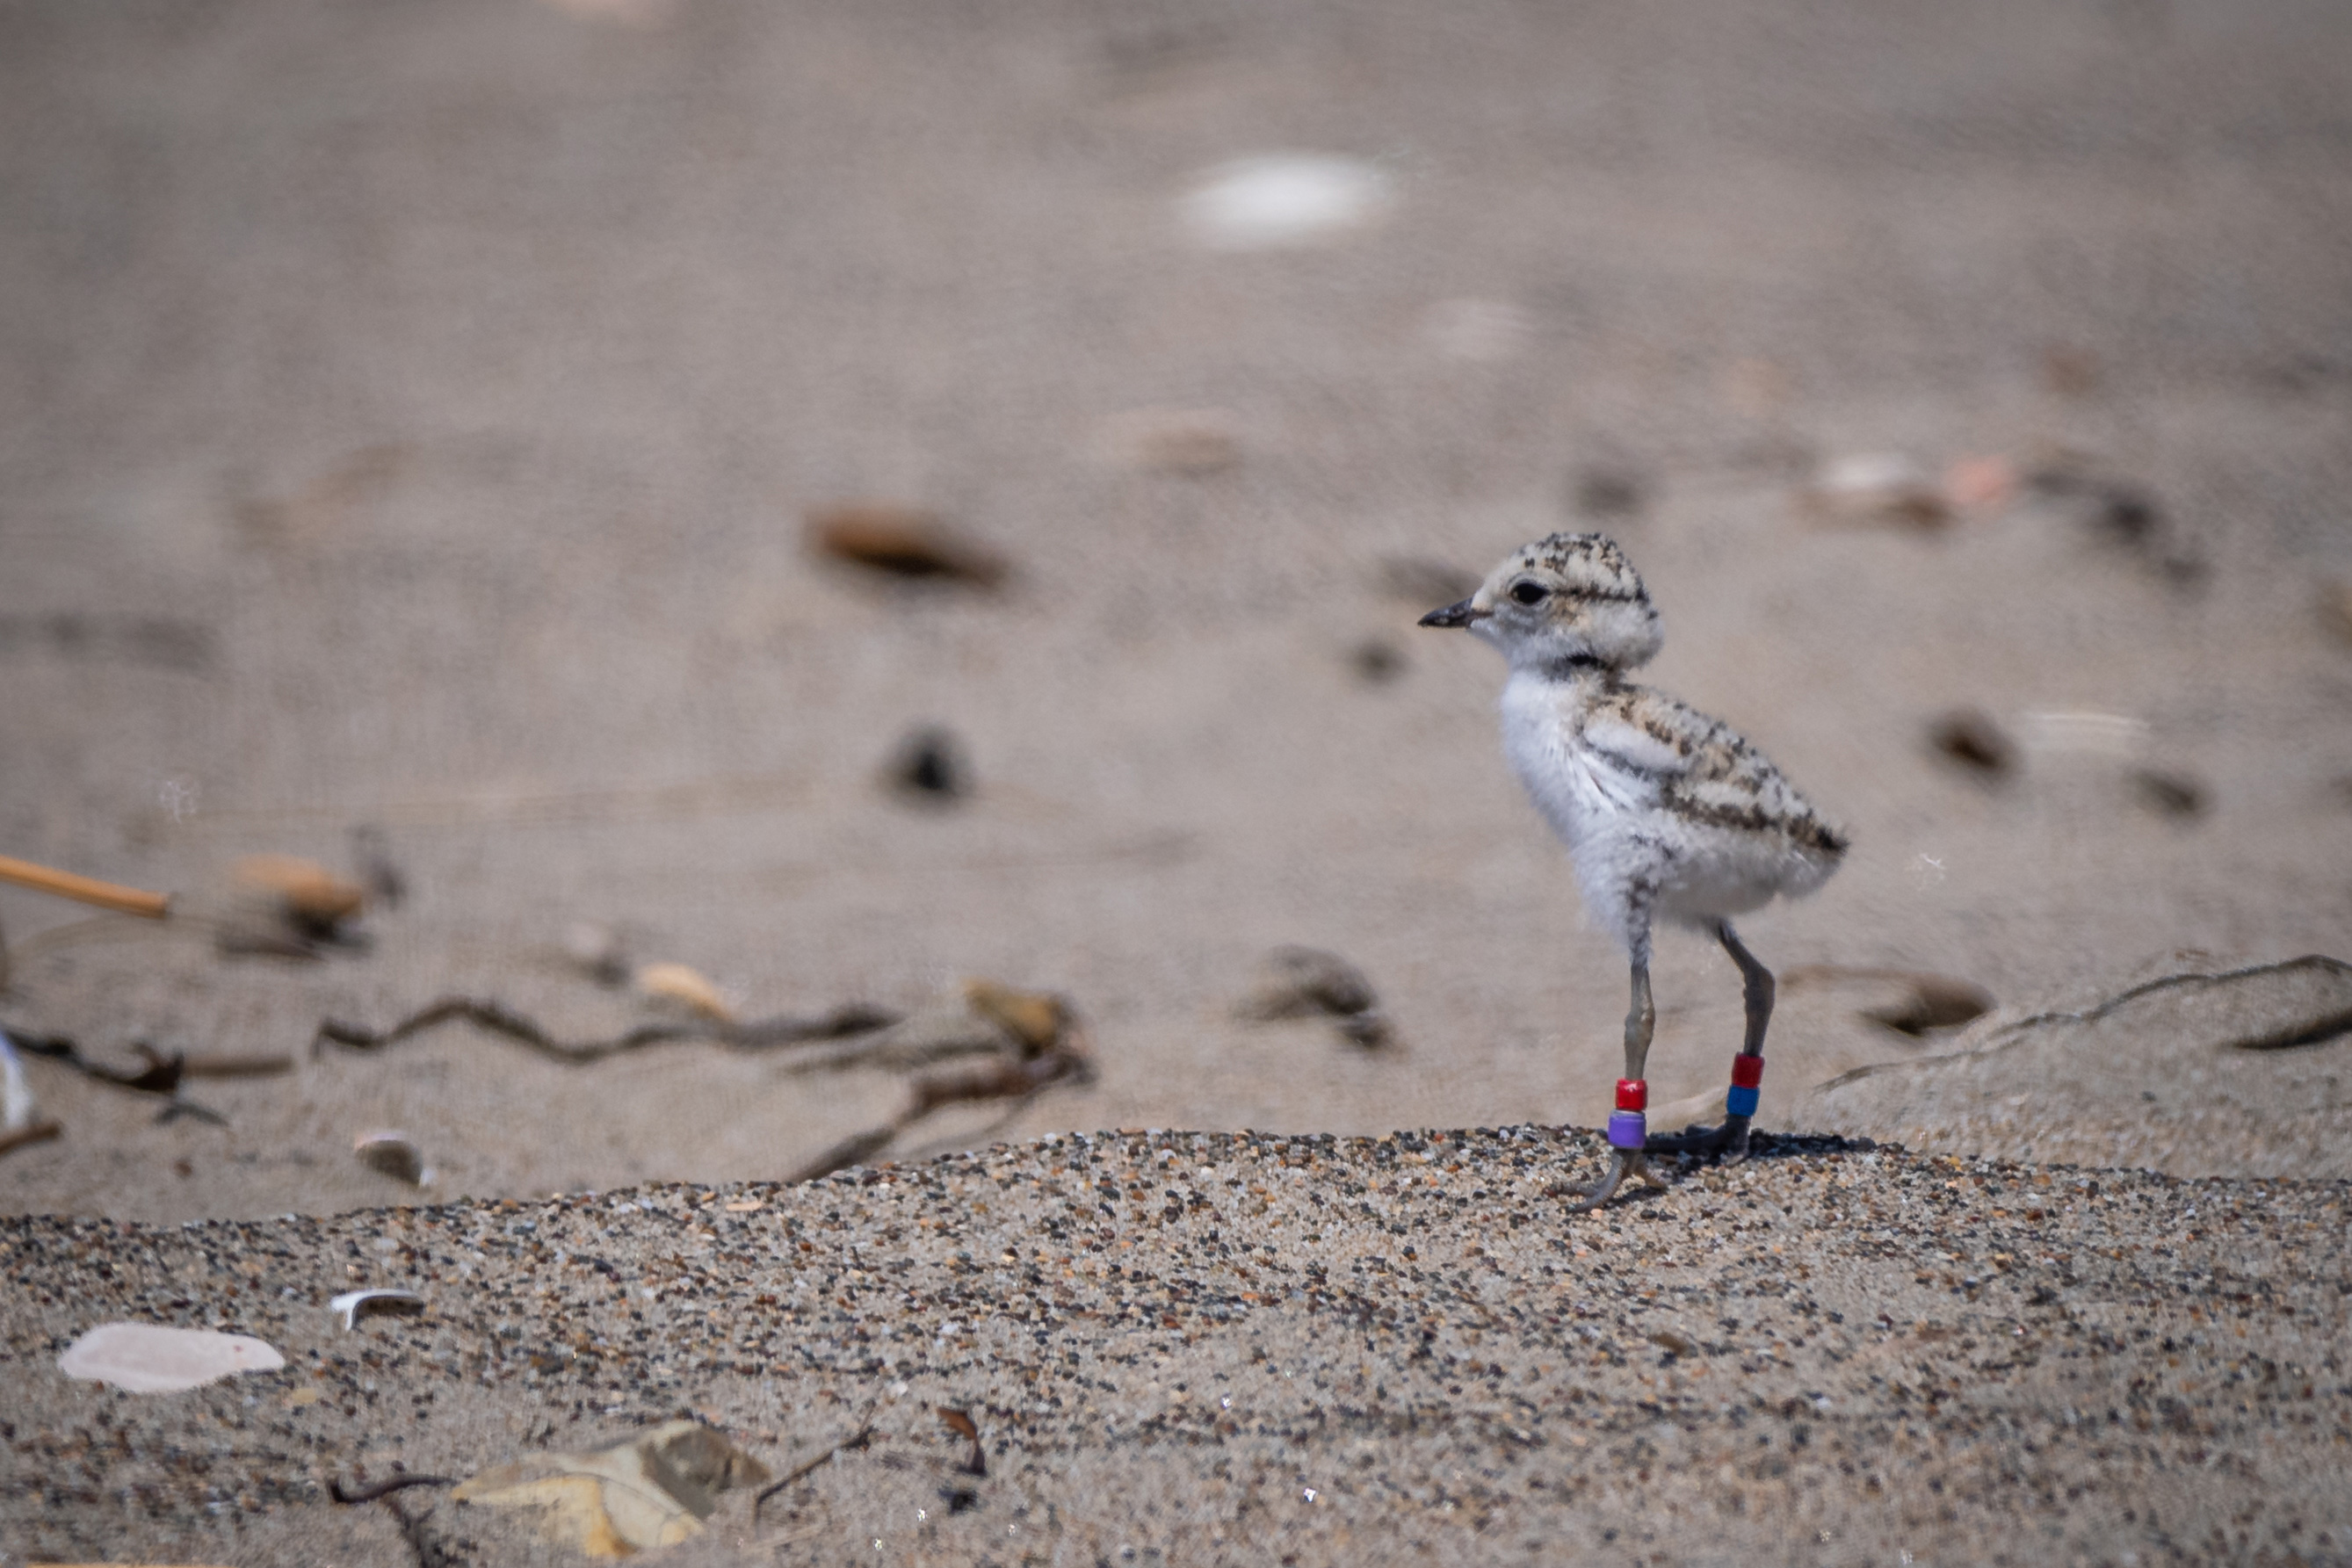 A photo of a small black-speckled, beige-colored chick standing on sand. Red and violet bands are attached to its left leg and red and blue bands are attached to its right leg.